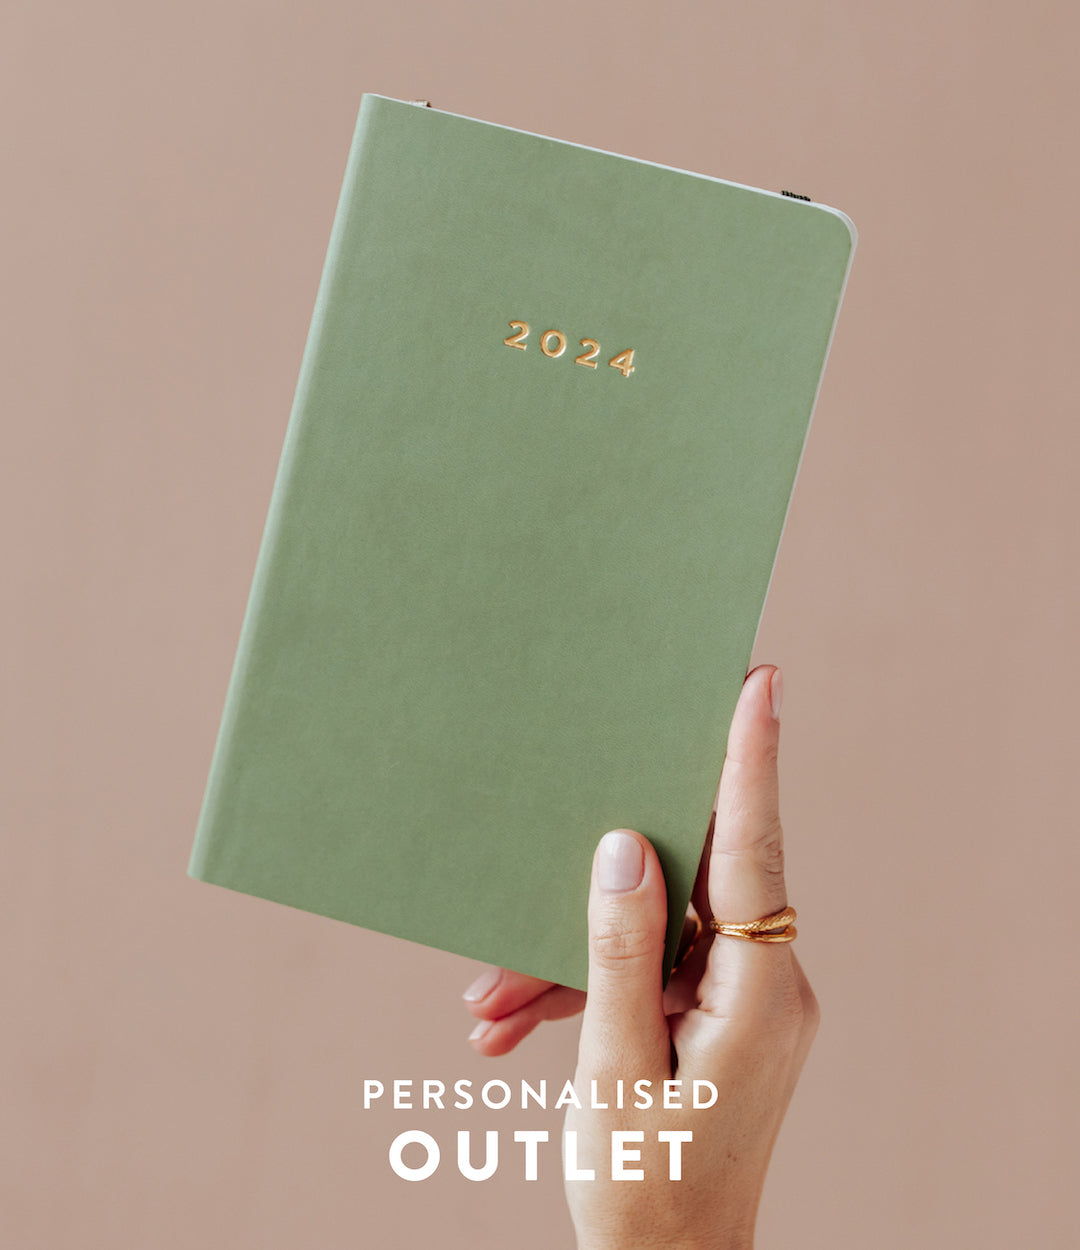 (Personalised Outlet) 2024 Minimal (Smooth) Planner